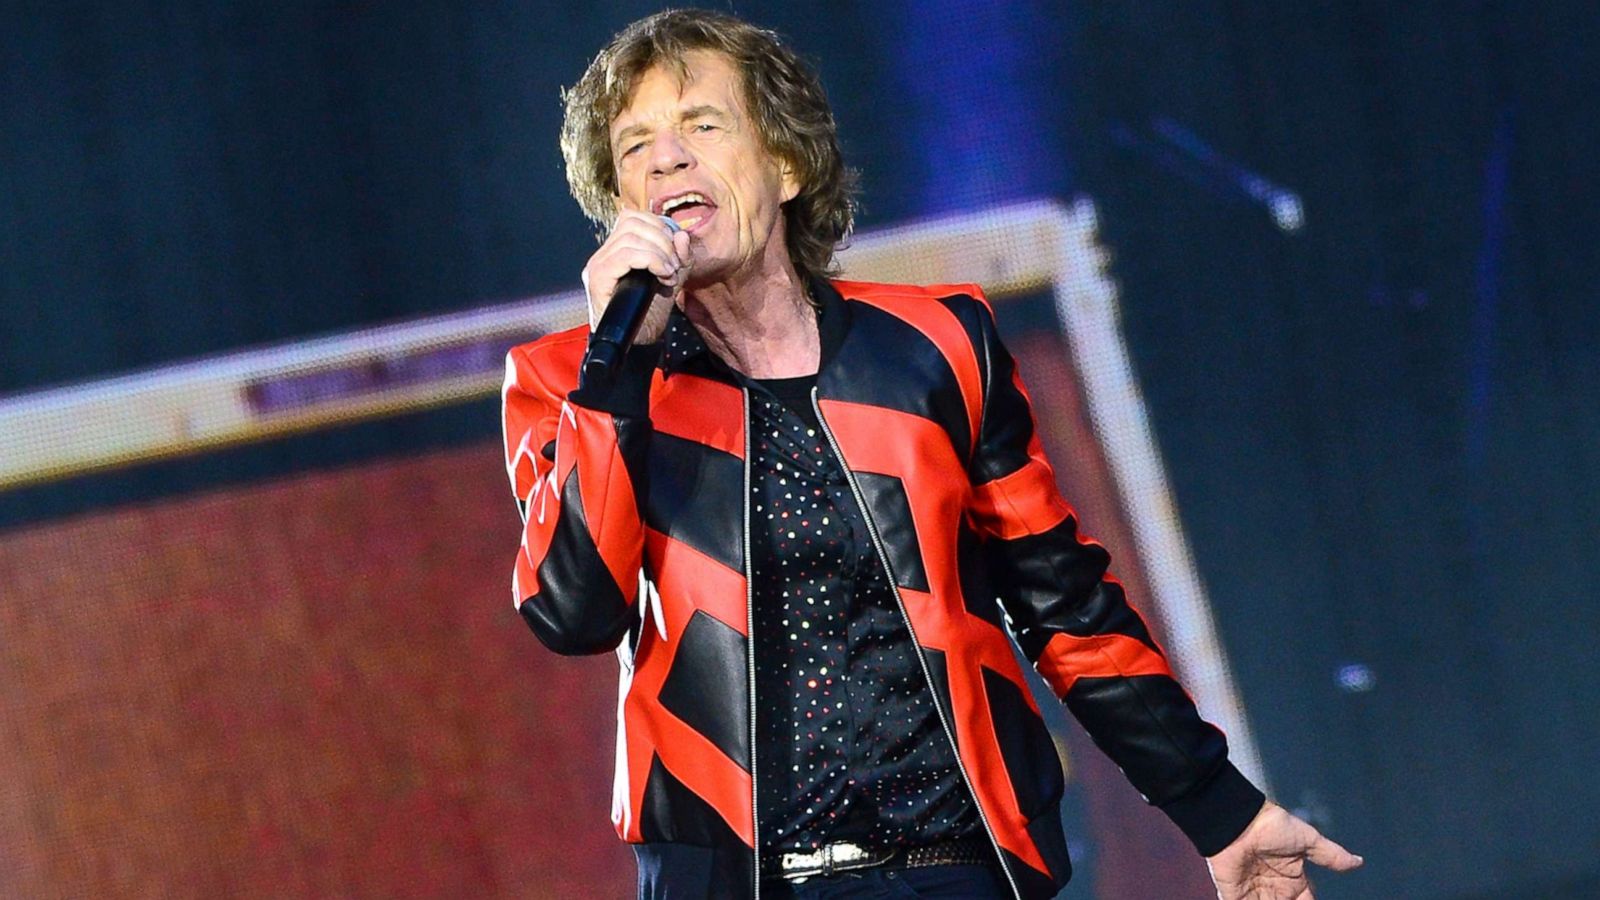 PHOTO: Mick Jagger of The Rolling Stones performs on stage during the SIXTY tour, at Anfield Stadium on June 9, 2022 in Liverpool, England.